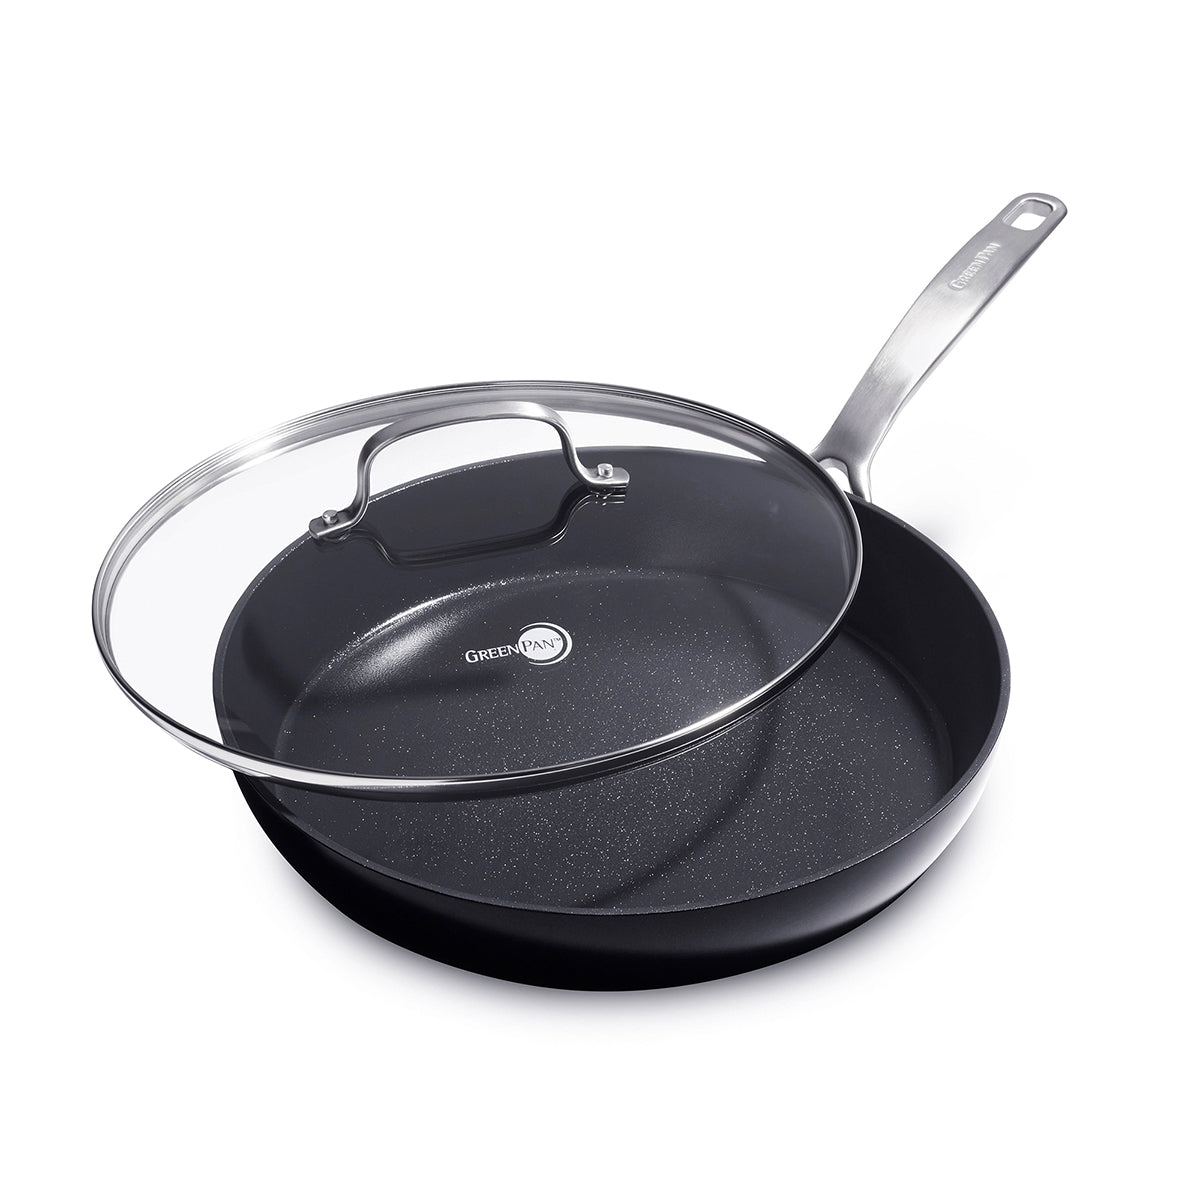 GreenPan Lima 12 in. Aluminum Hard Anodized Ceramic Nonstick Frying Pan  Skillet with Lid CW0004157 - The Home Depot